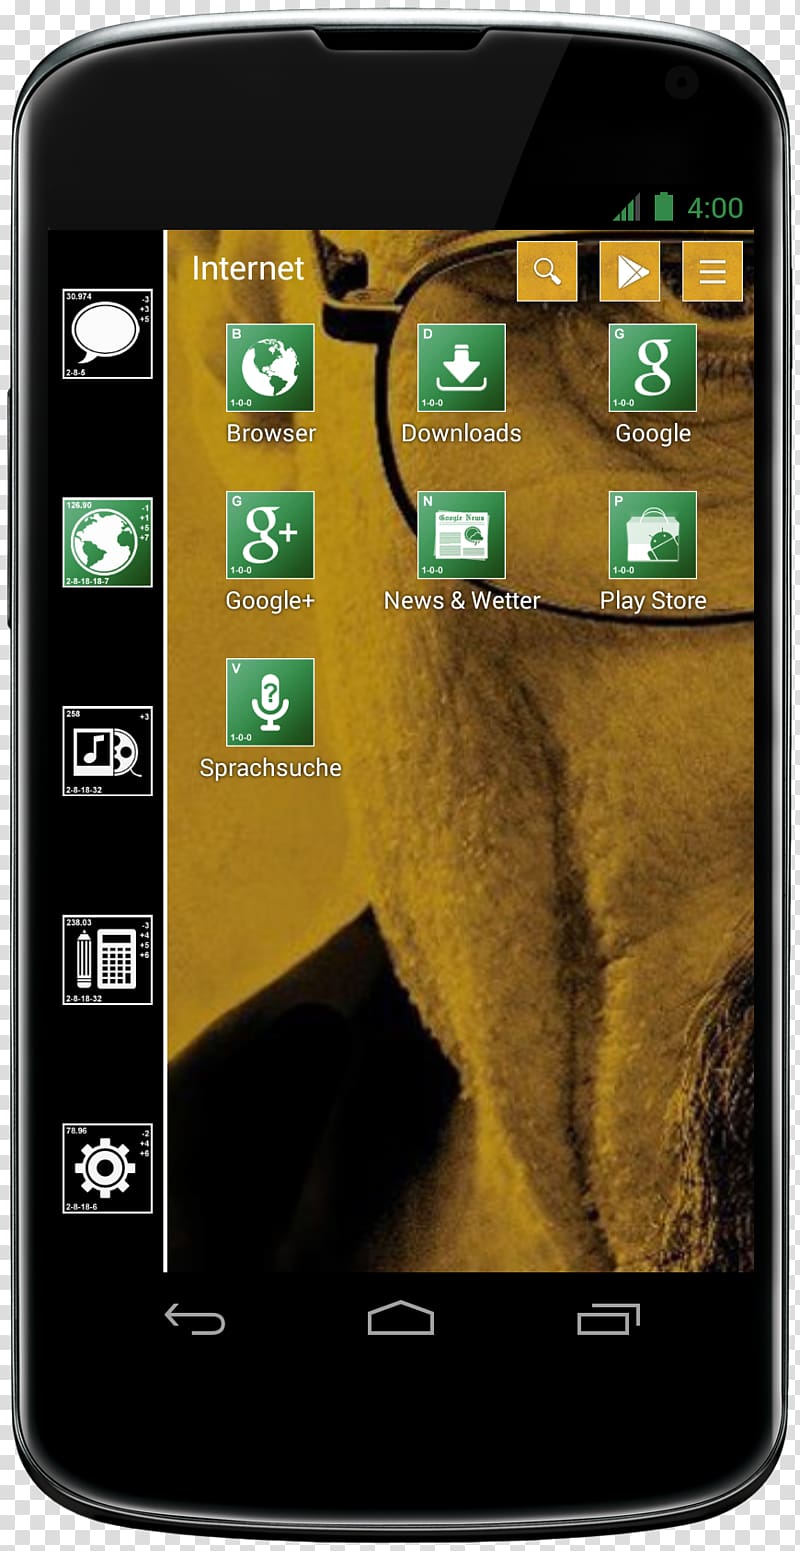 Smartphone Breaking Bad, Season 5 Crime Drama Television show, smartphone transparent background PNG clipart